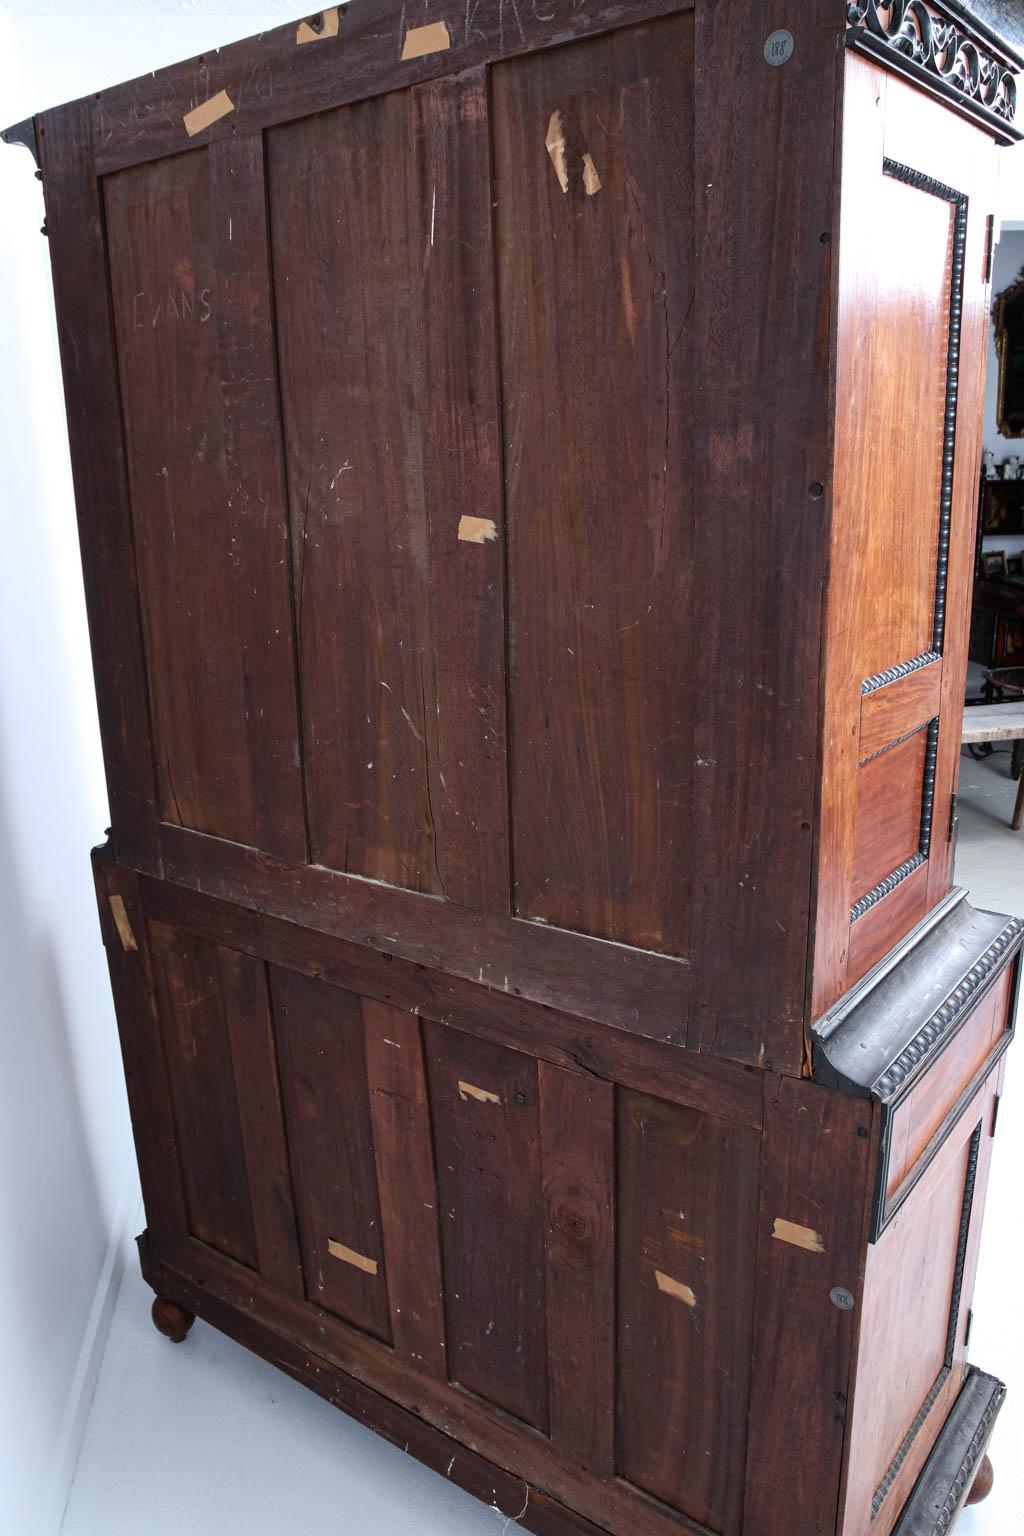 Anglo-Indian style satinwood and ebony cabinet with metal hardware on turned turnip feet. The piece comes with a two-door cabinet over three small drawers and is heavily detailed with scrolled foliage tracery as seen on the bottom skirt and